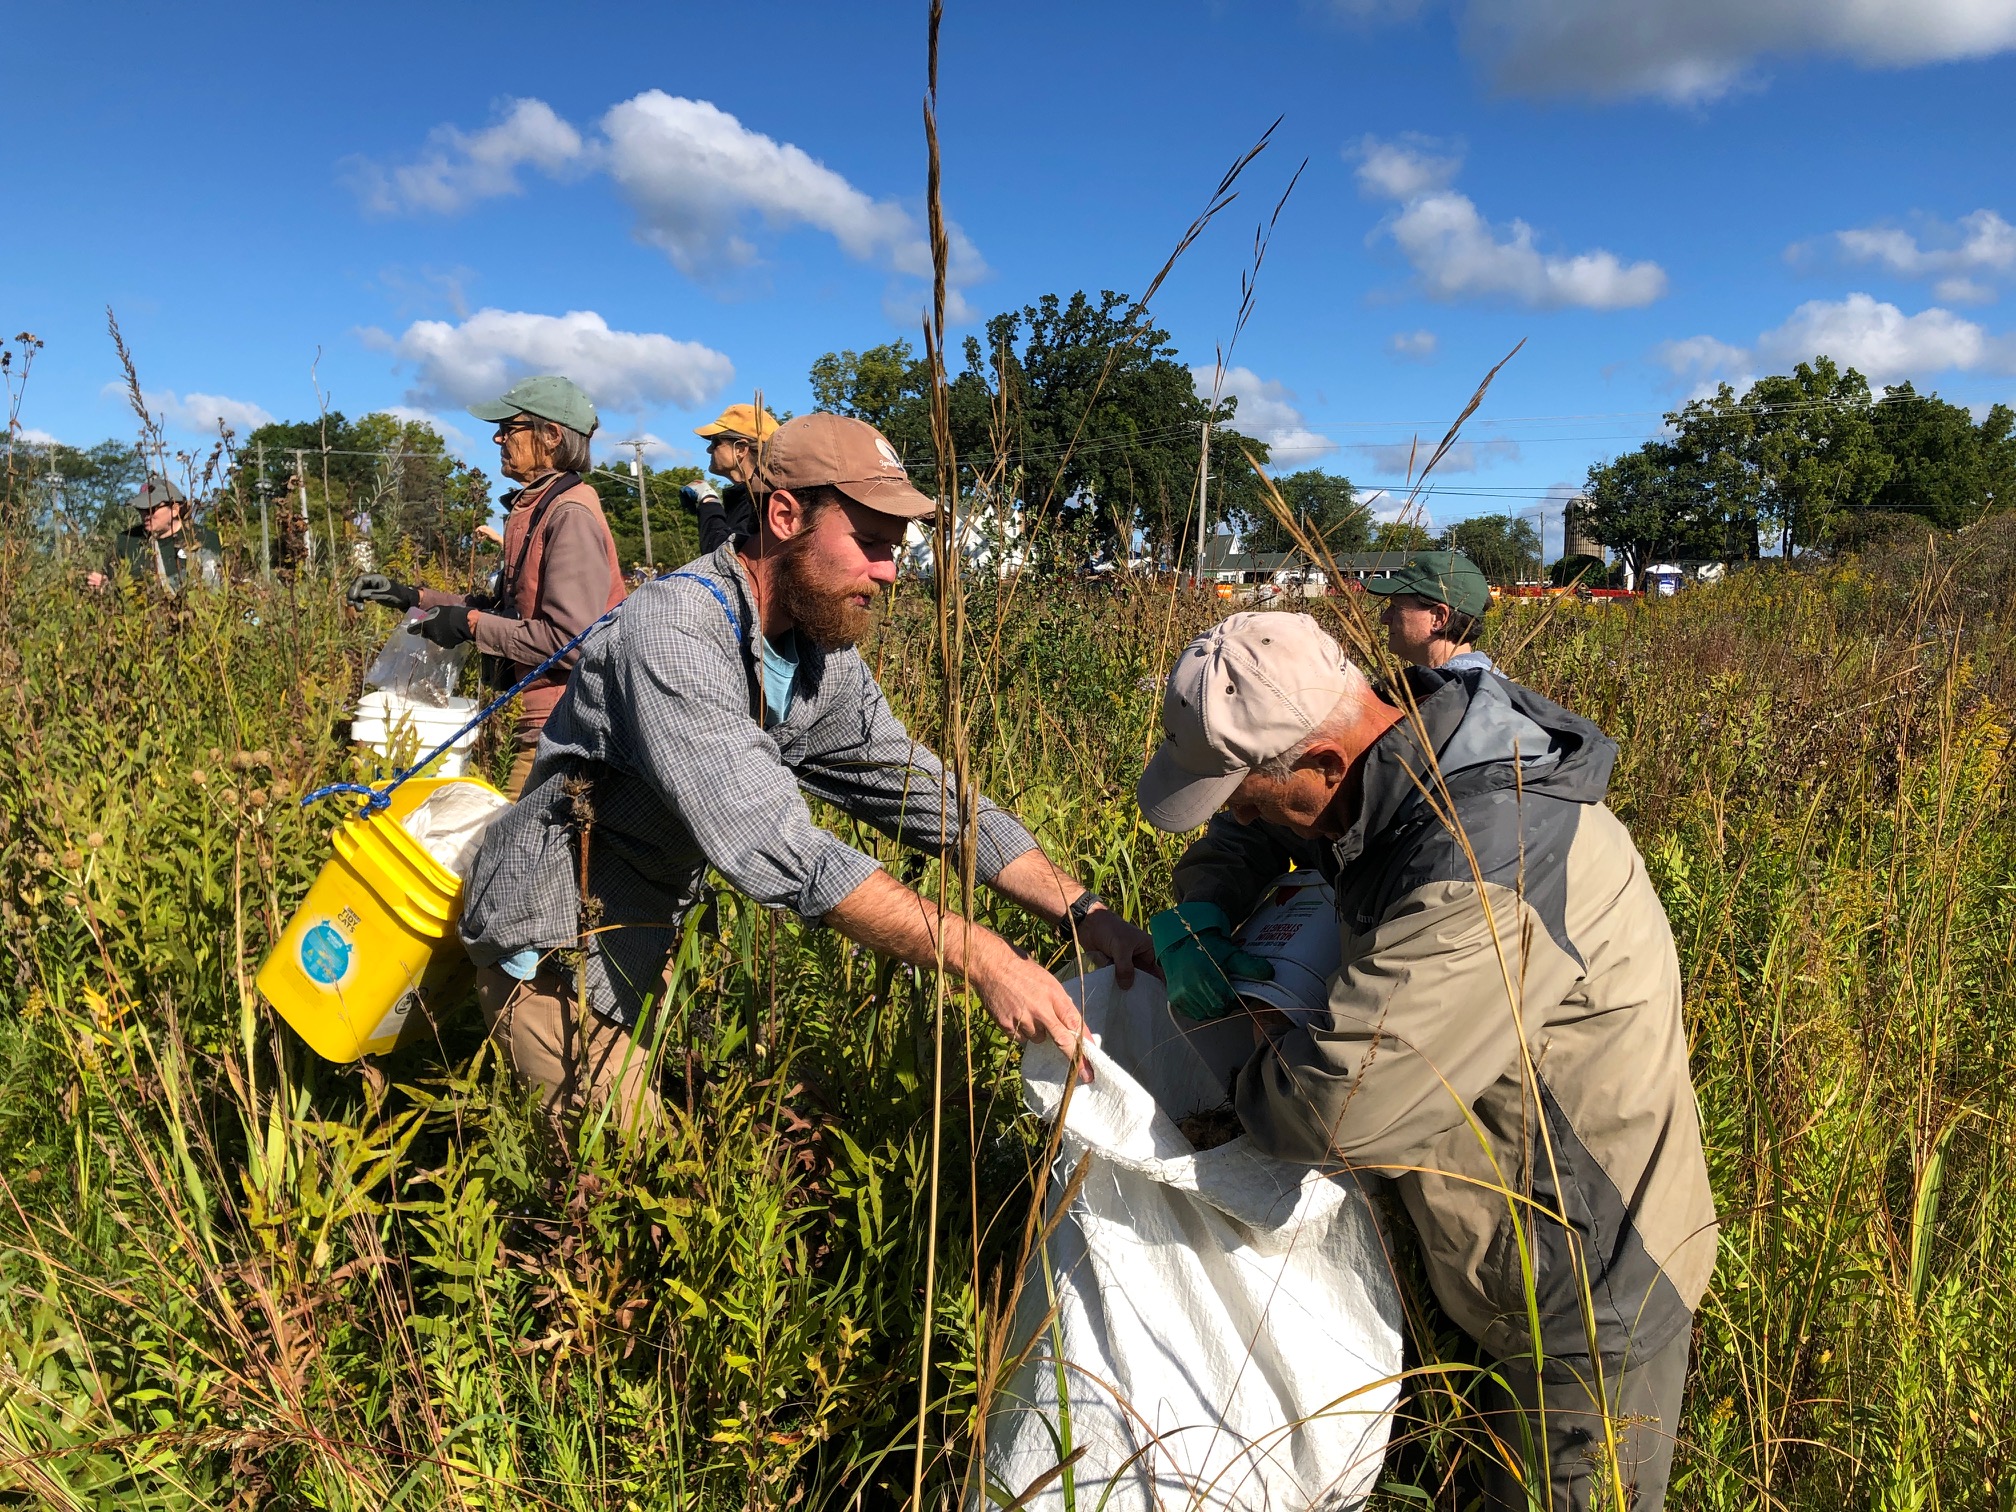 Volunteers assist CFC Restoration Program Manager with seed harvesting in a preserve.